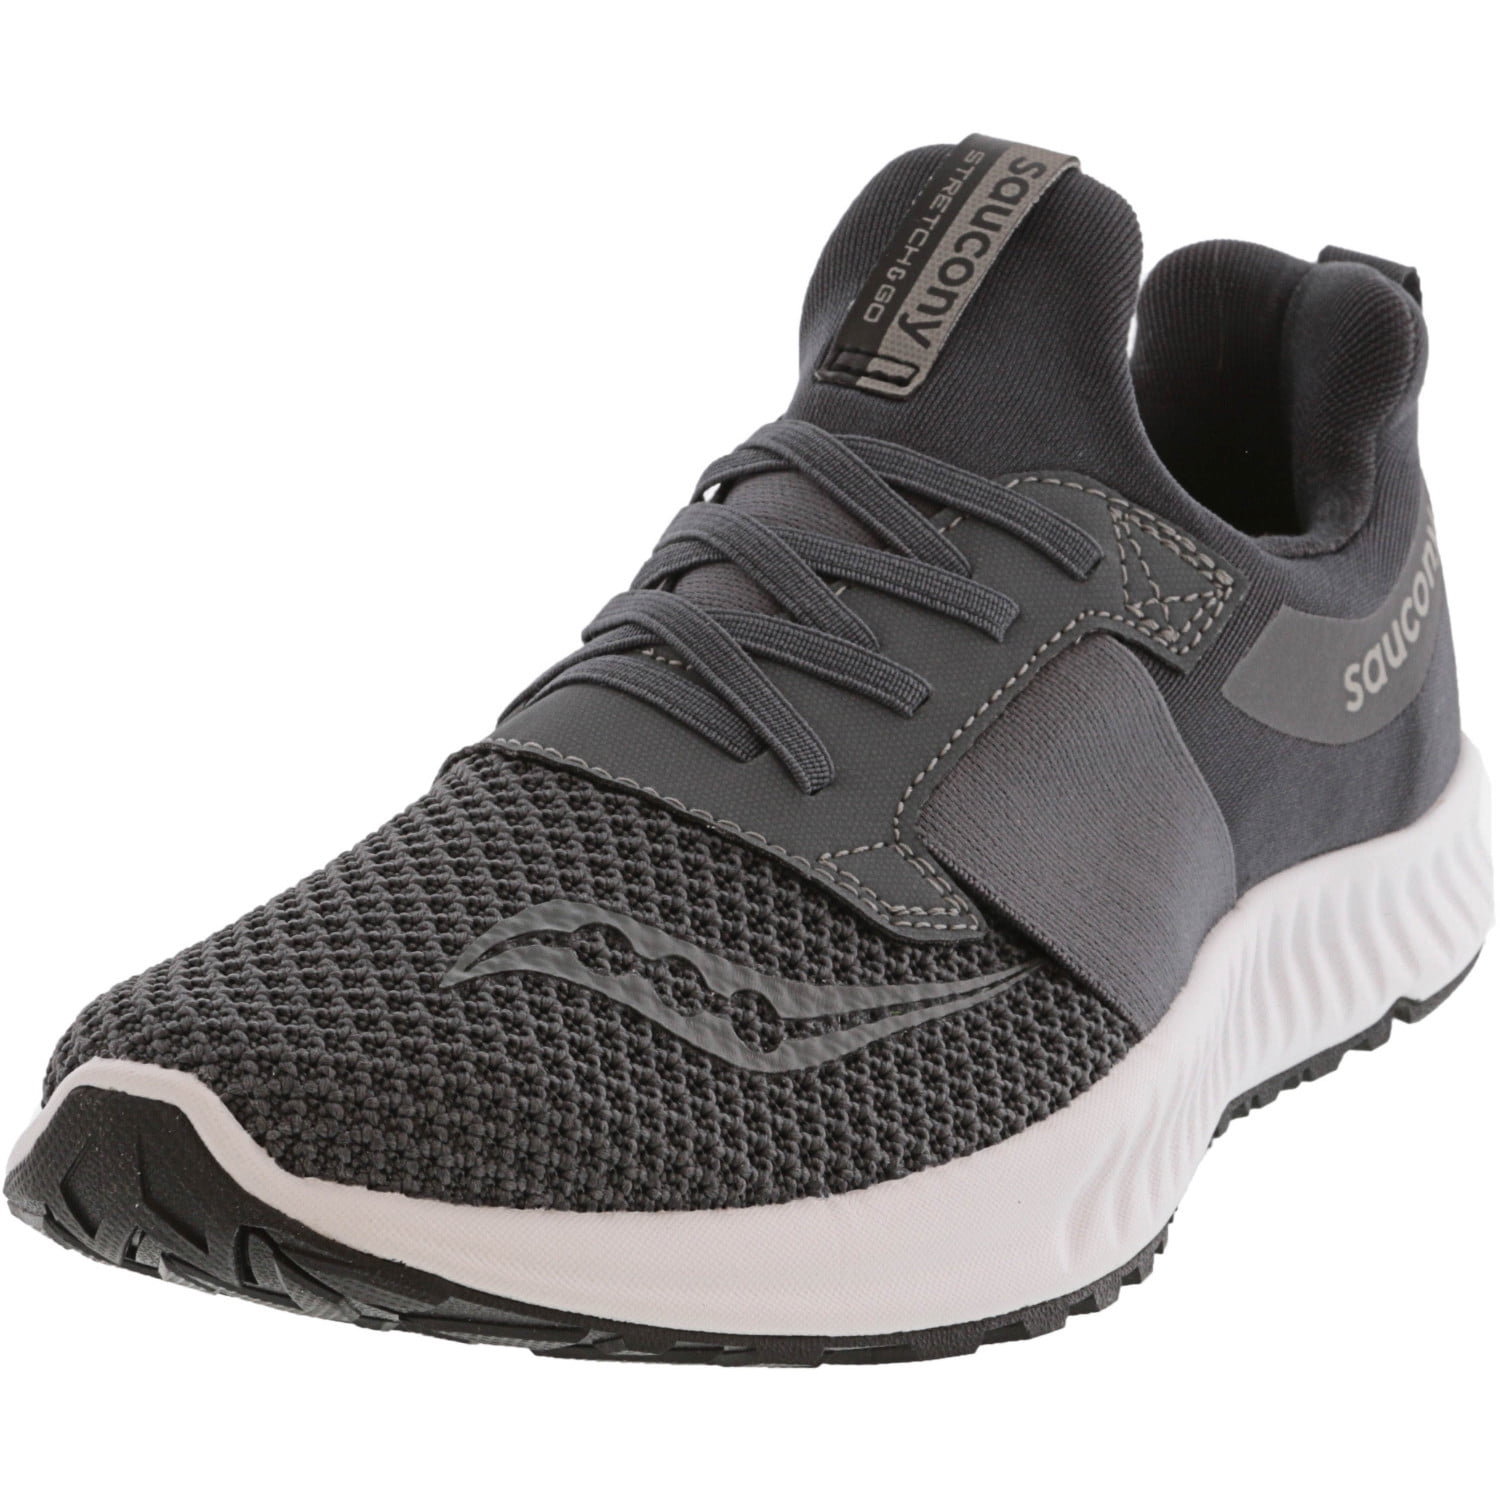 Saucony - Saucony Men's Stretch And Go Breeze Charcoal Ankle-High ...